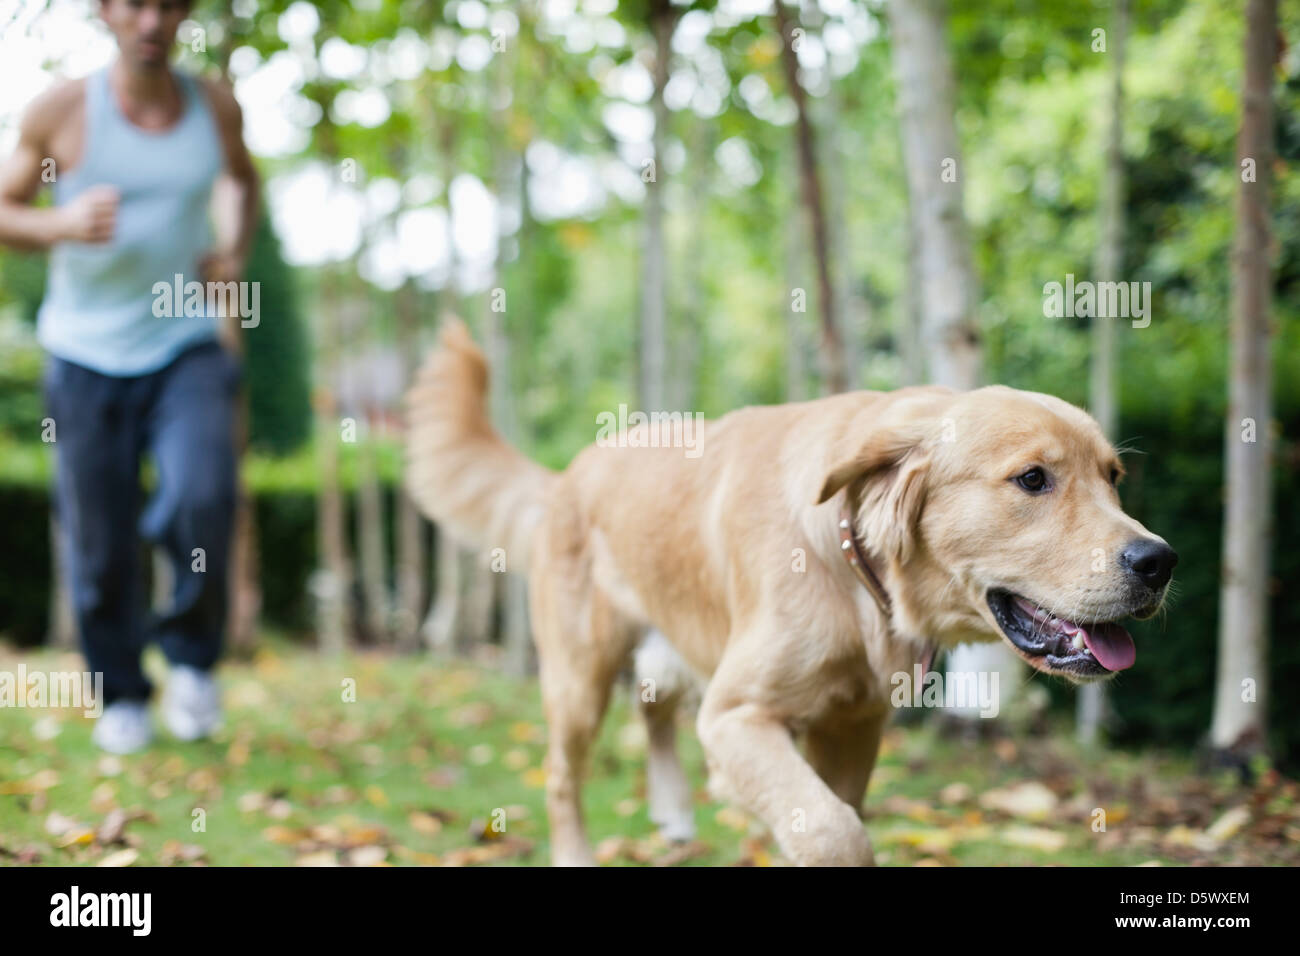 Man and dog running in park Stock Photo